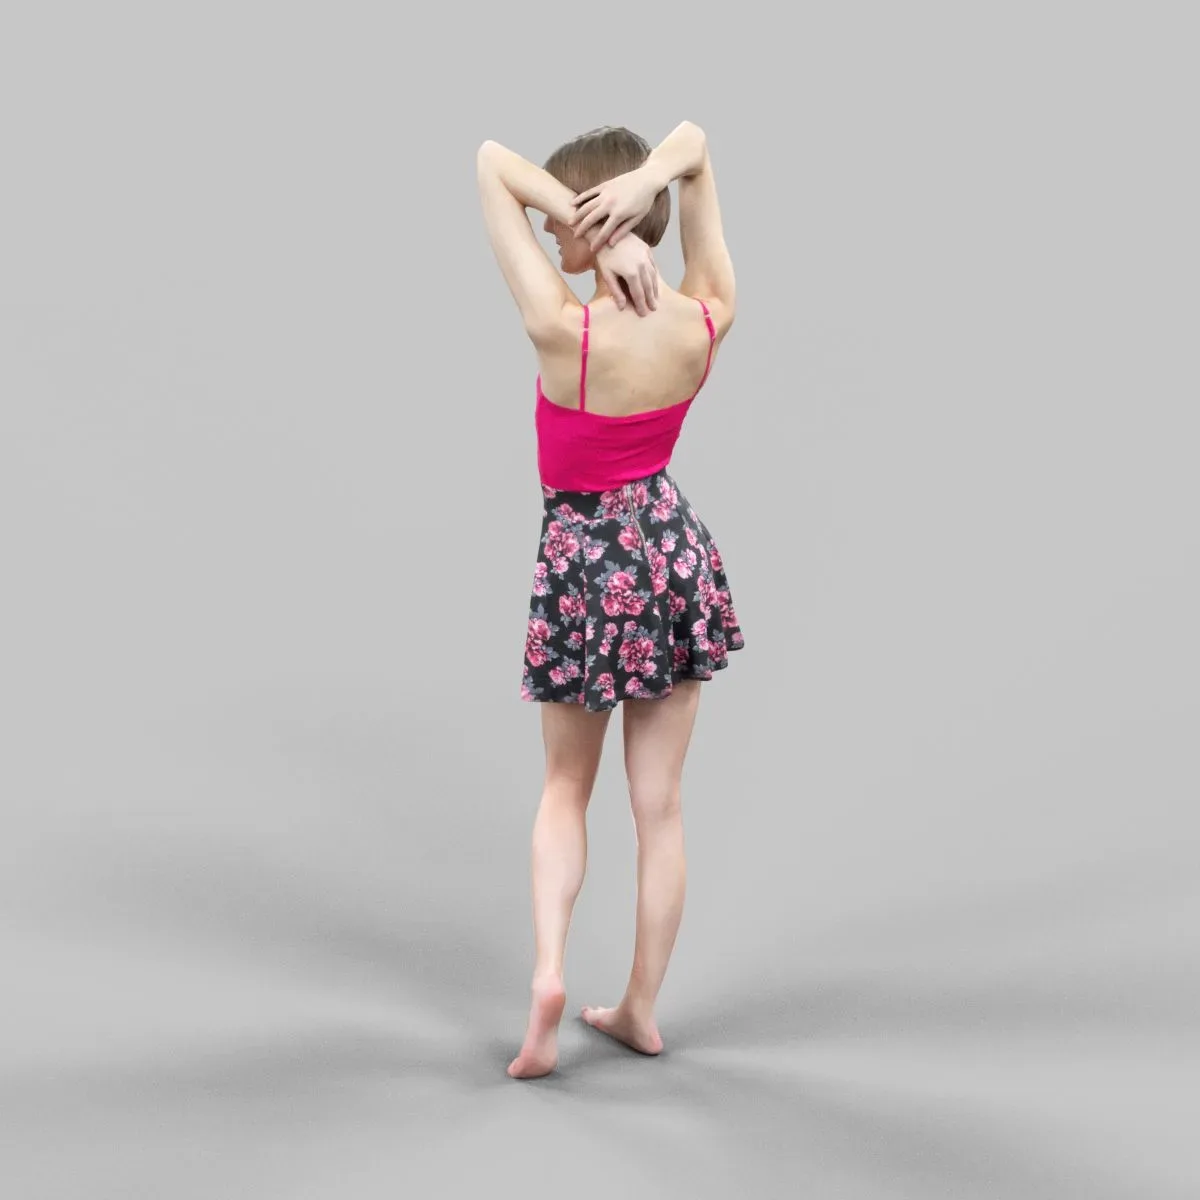 Woman in Pink top and Flower Skirt Posing Hands on Head